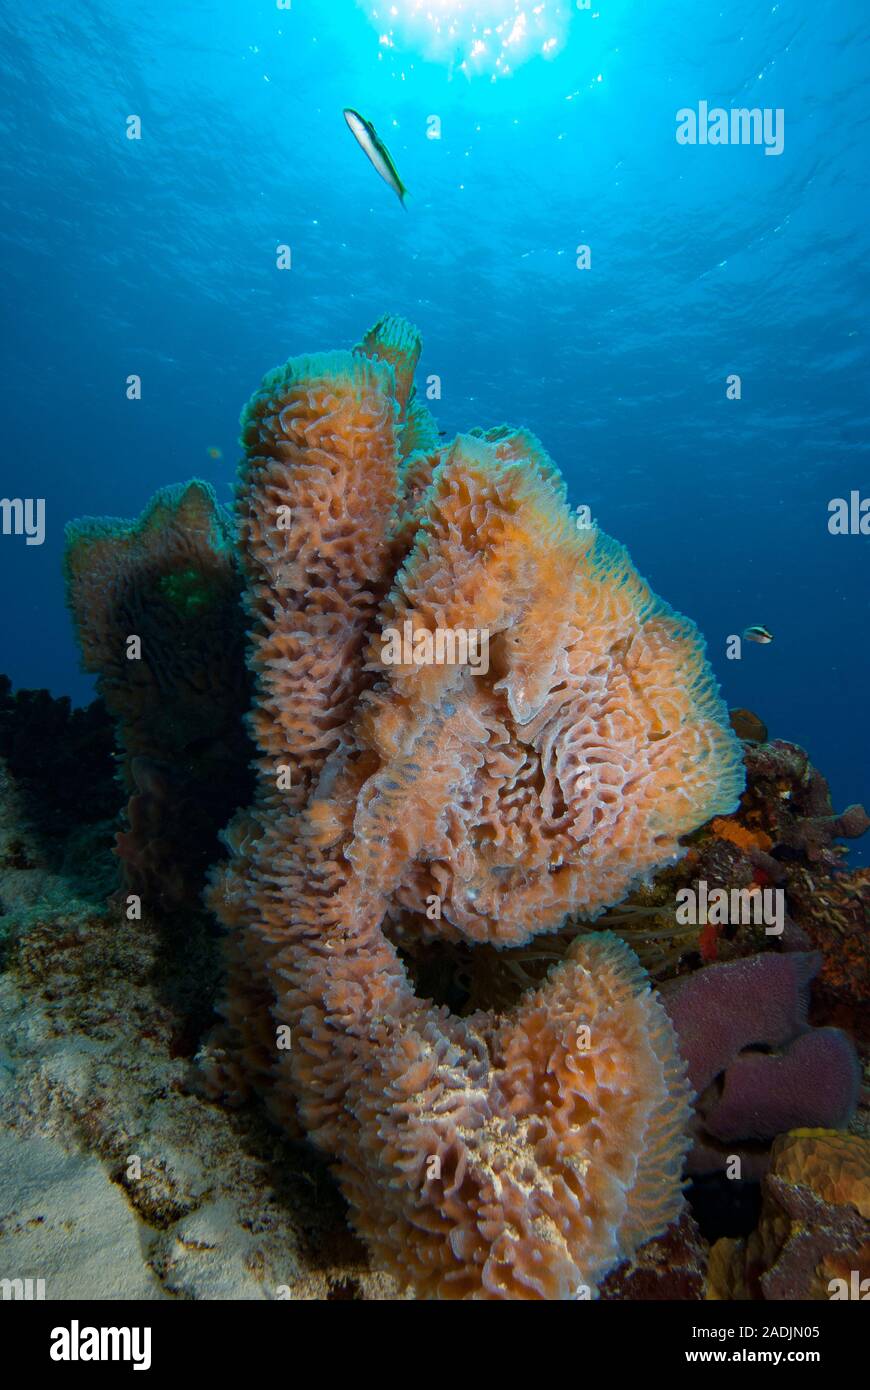 Cozumel Messico Underwater Tropical Coral Reef Foto Stock